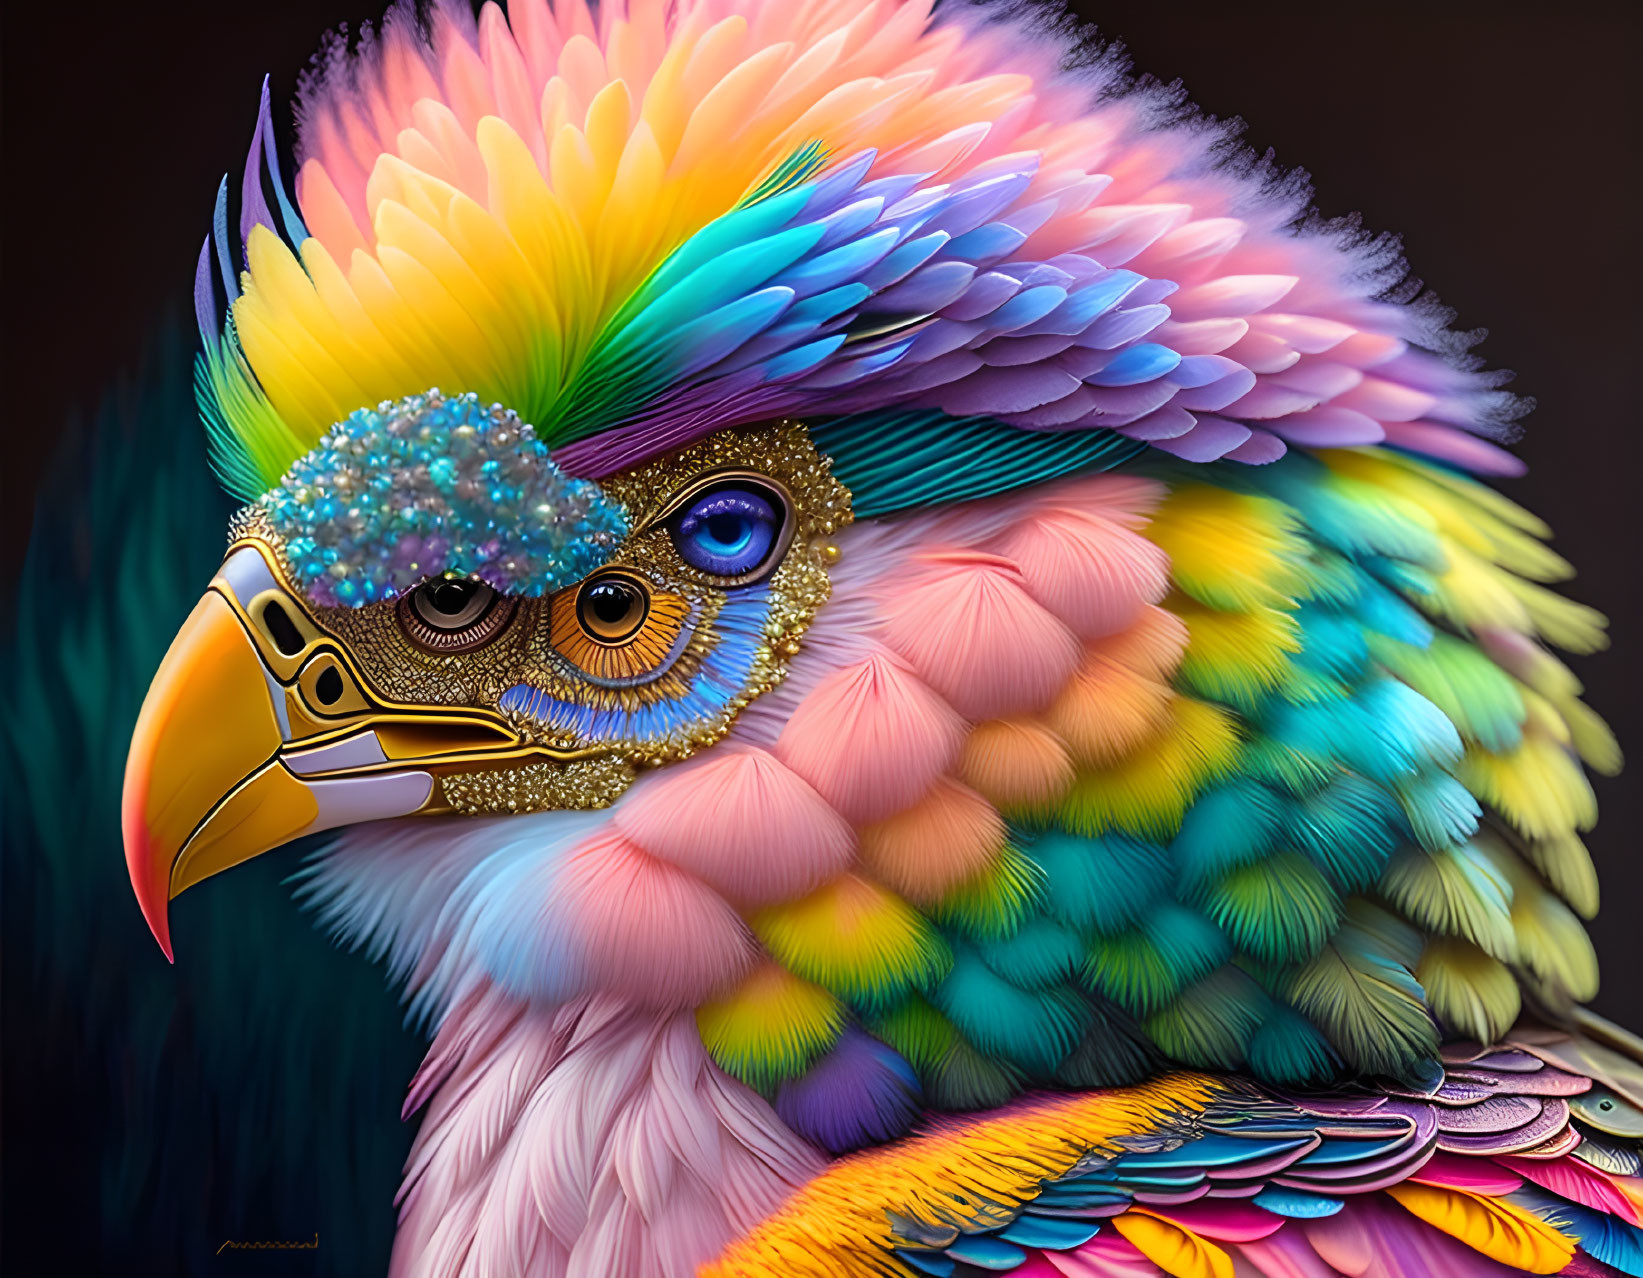 Colorful bird digital artwork with intricate beadwork and decorative mask.